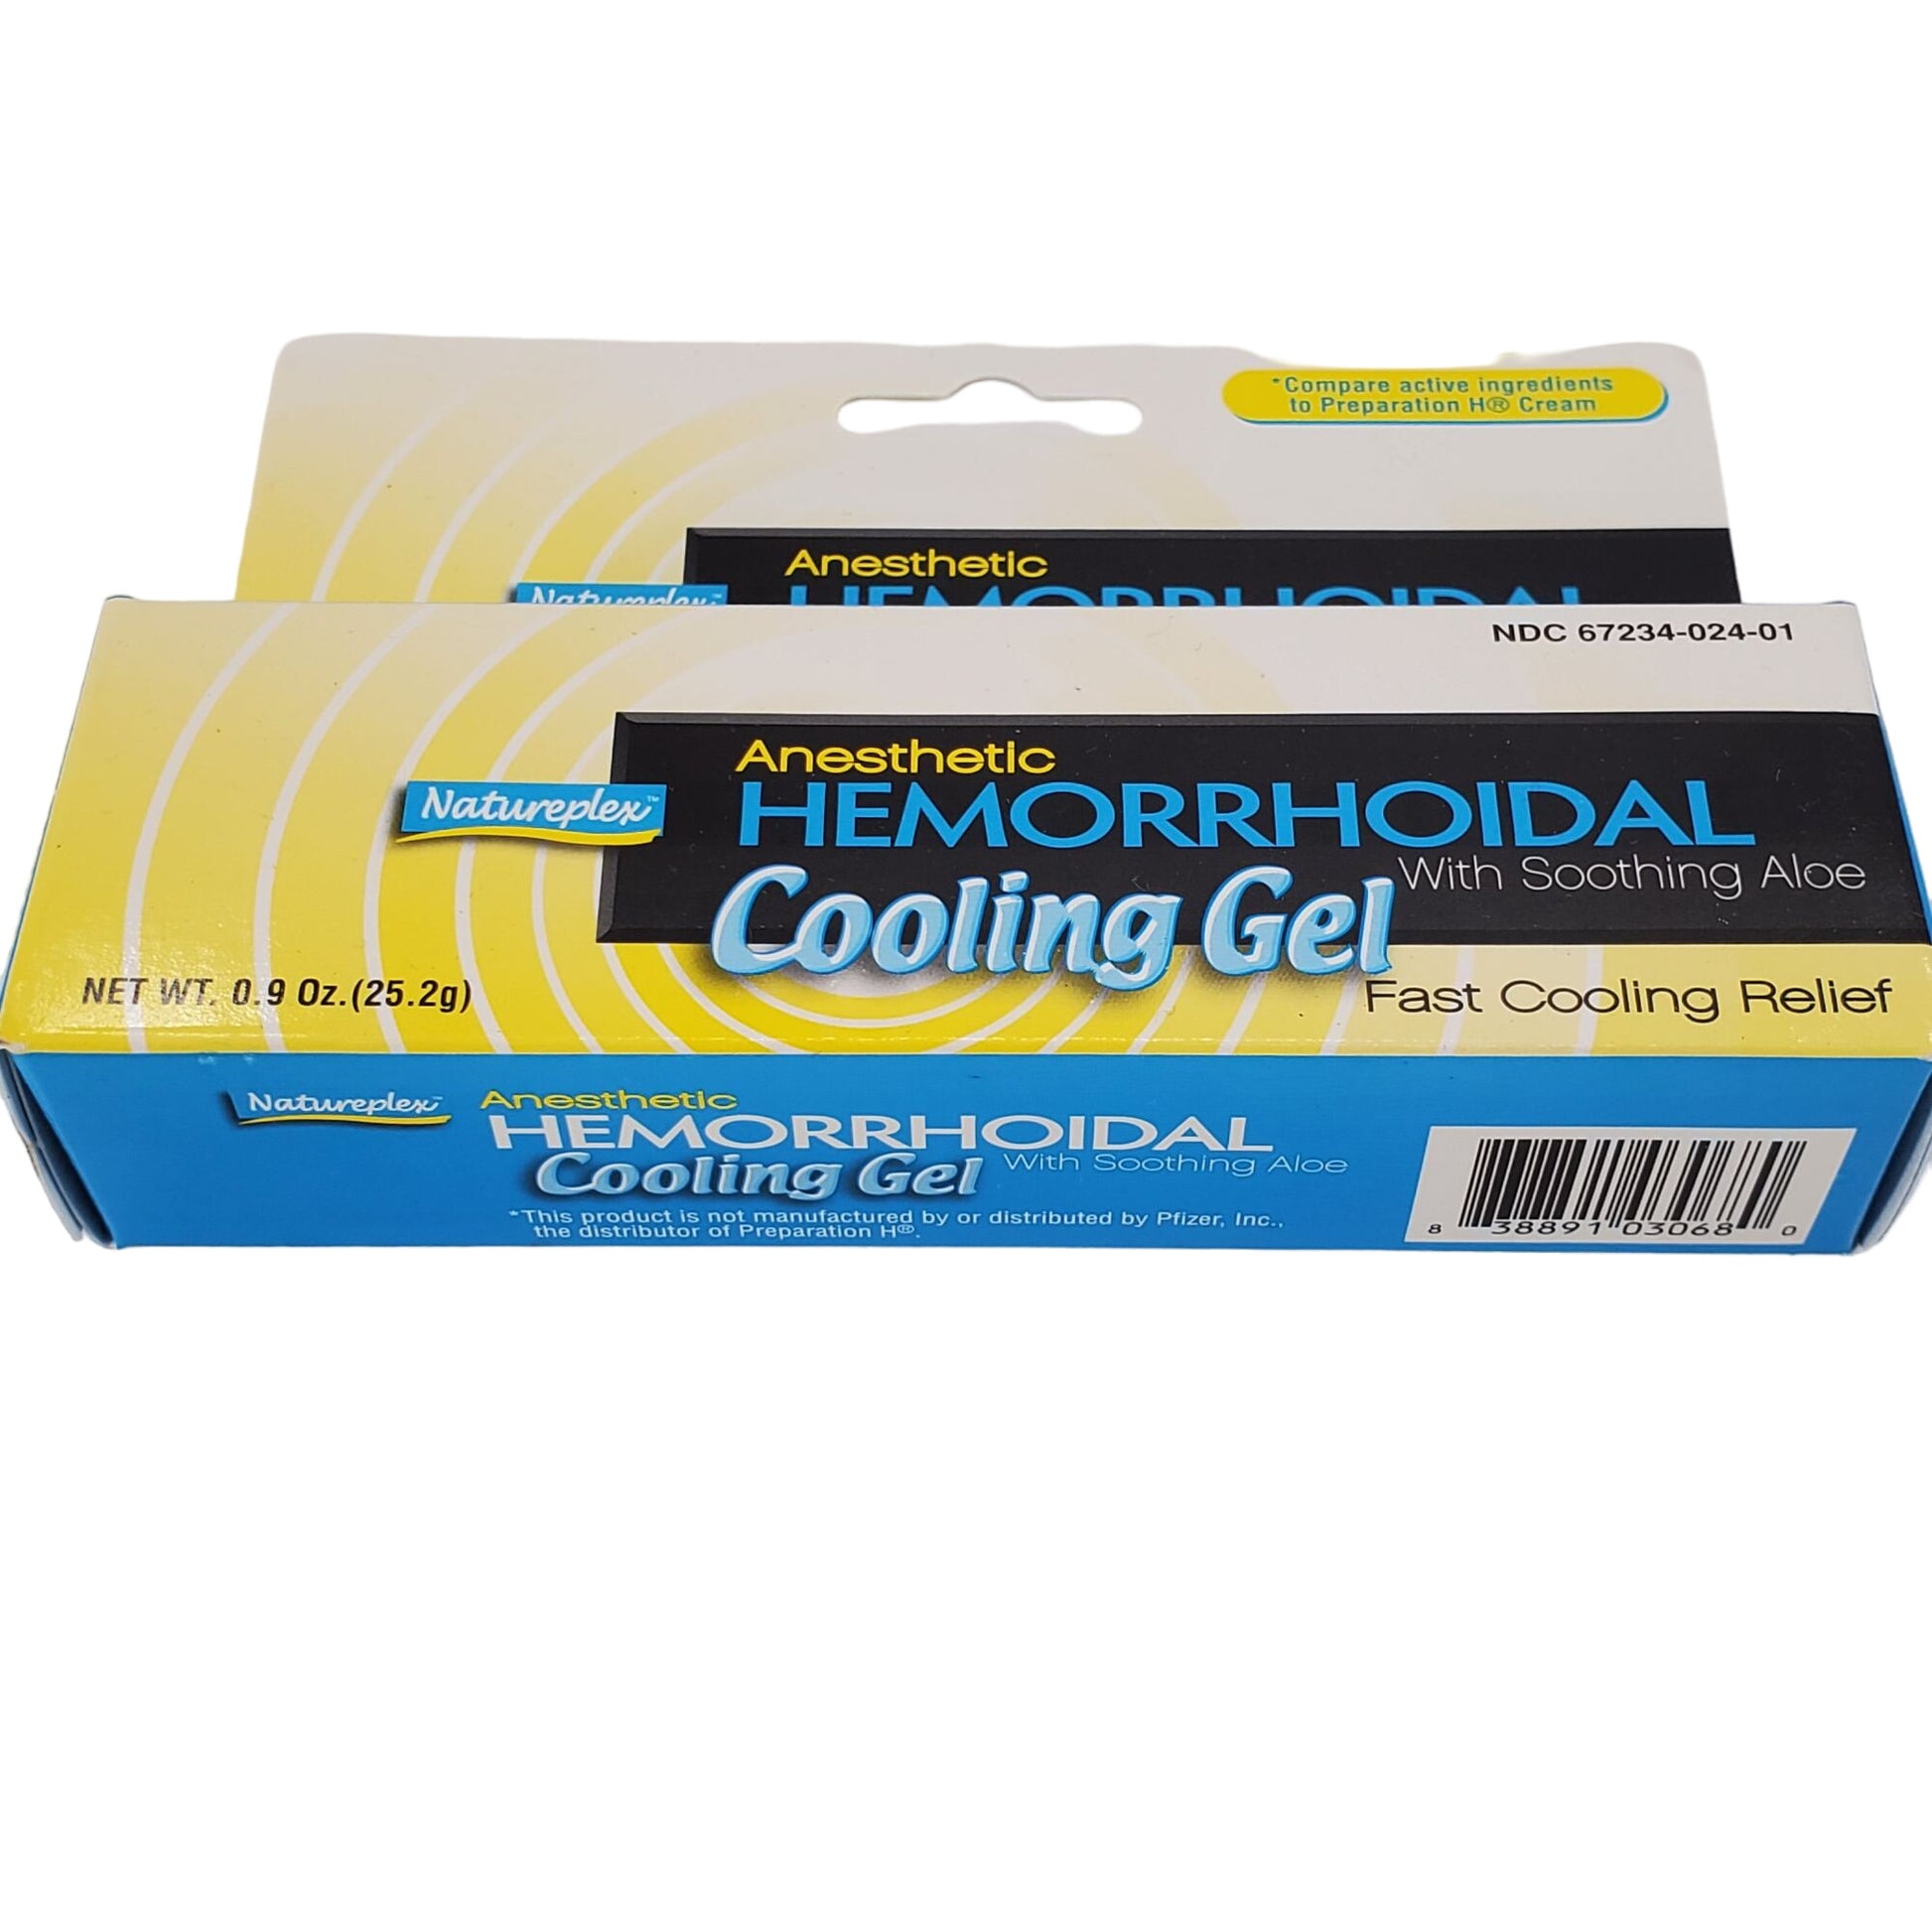 Hemorrhoid Relief Natureplex Anesthetic Hemorrhoidal Cooling Gel with Soothing Aloe 0.9oz (25.2g) Fast Cooling Relief